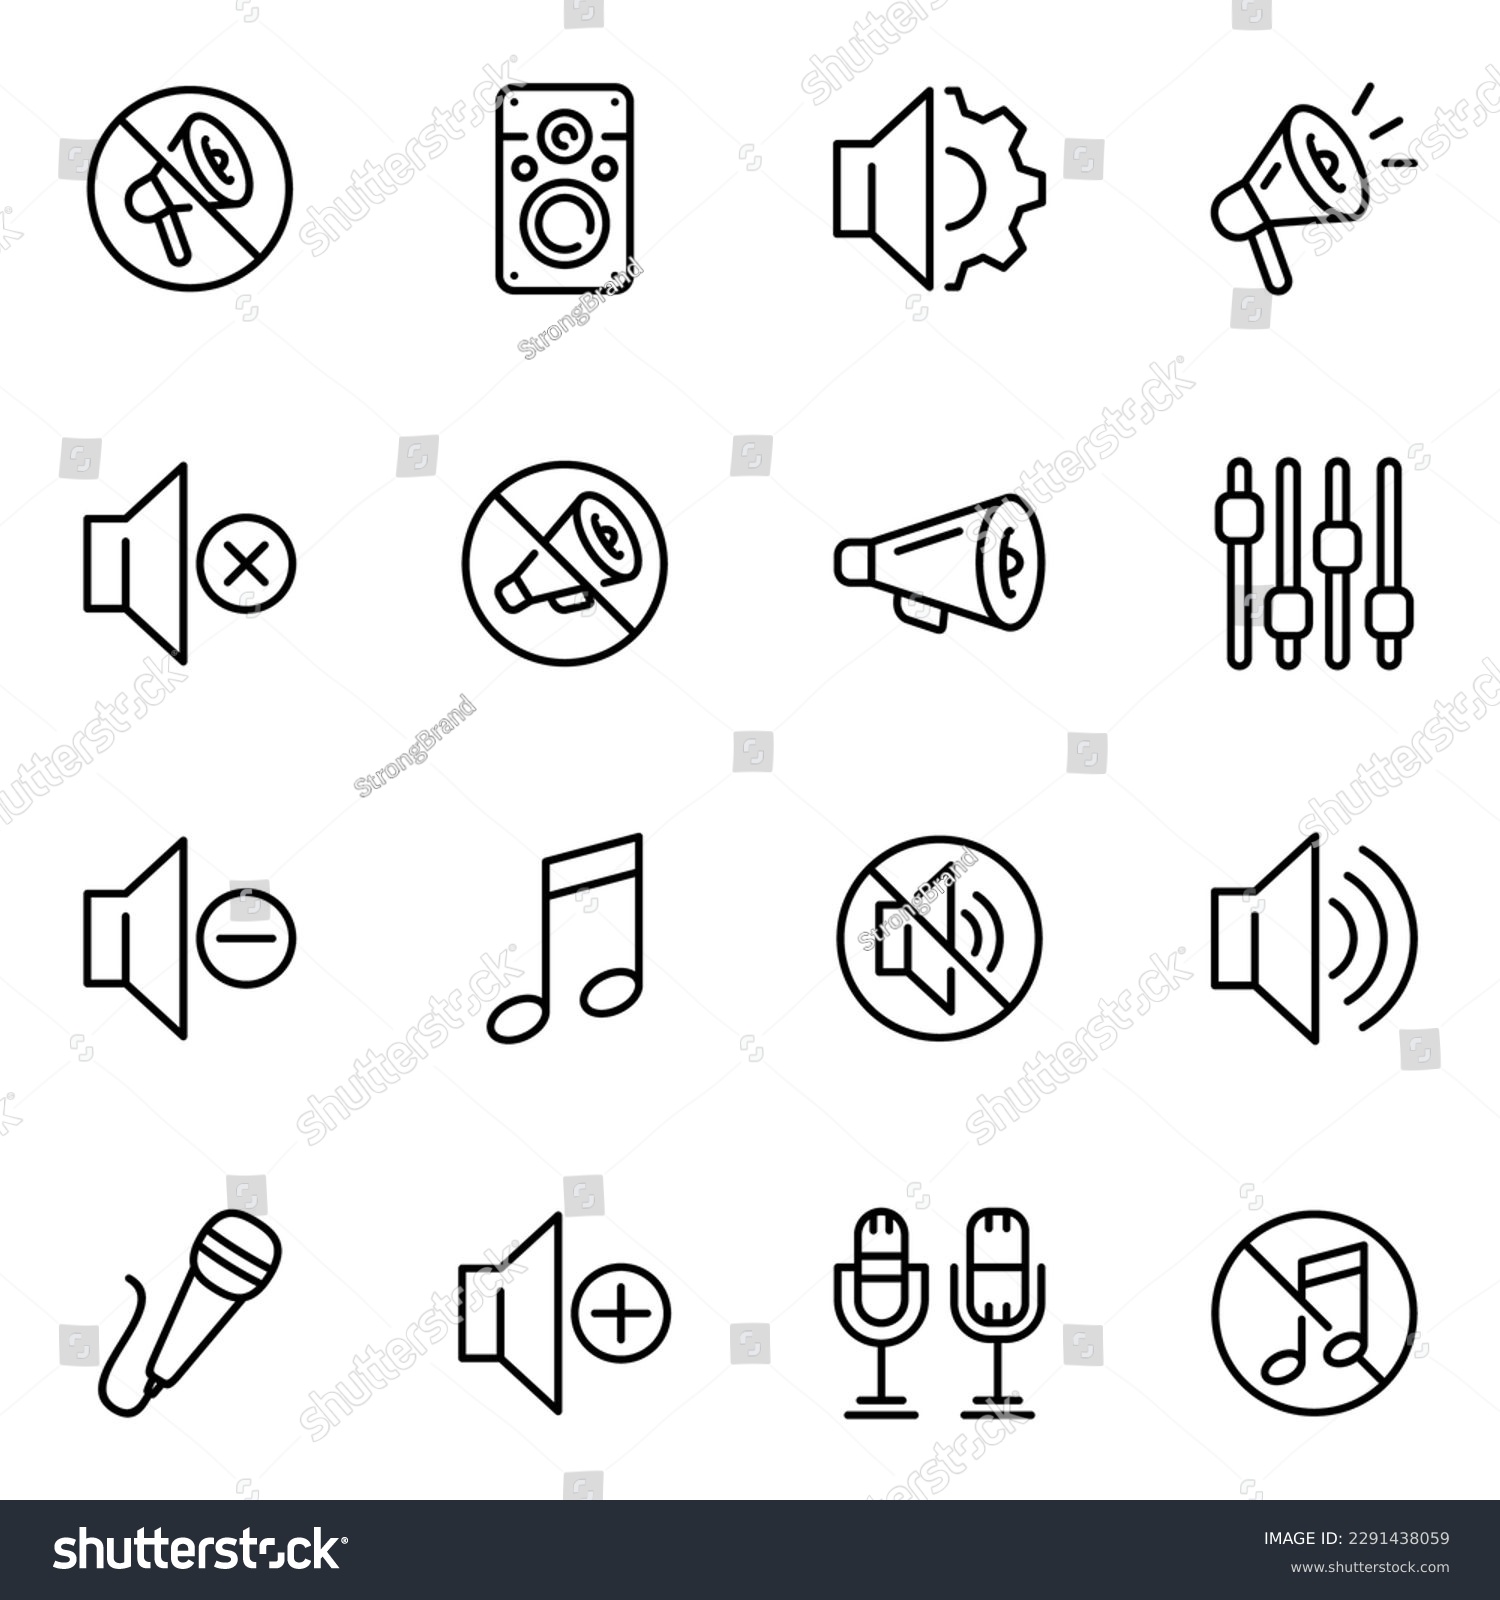 sound icons set. set of 16 sound line icons. microphone, sound, volume, icon set, speaker, singing, multimedia, voice, noise and song #2291438059